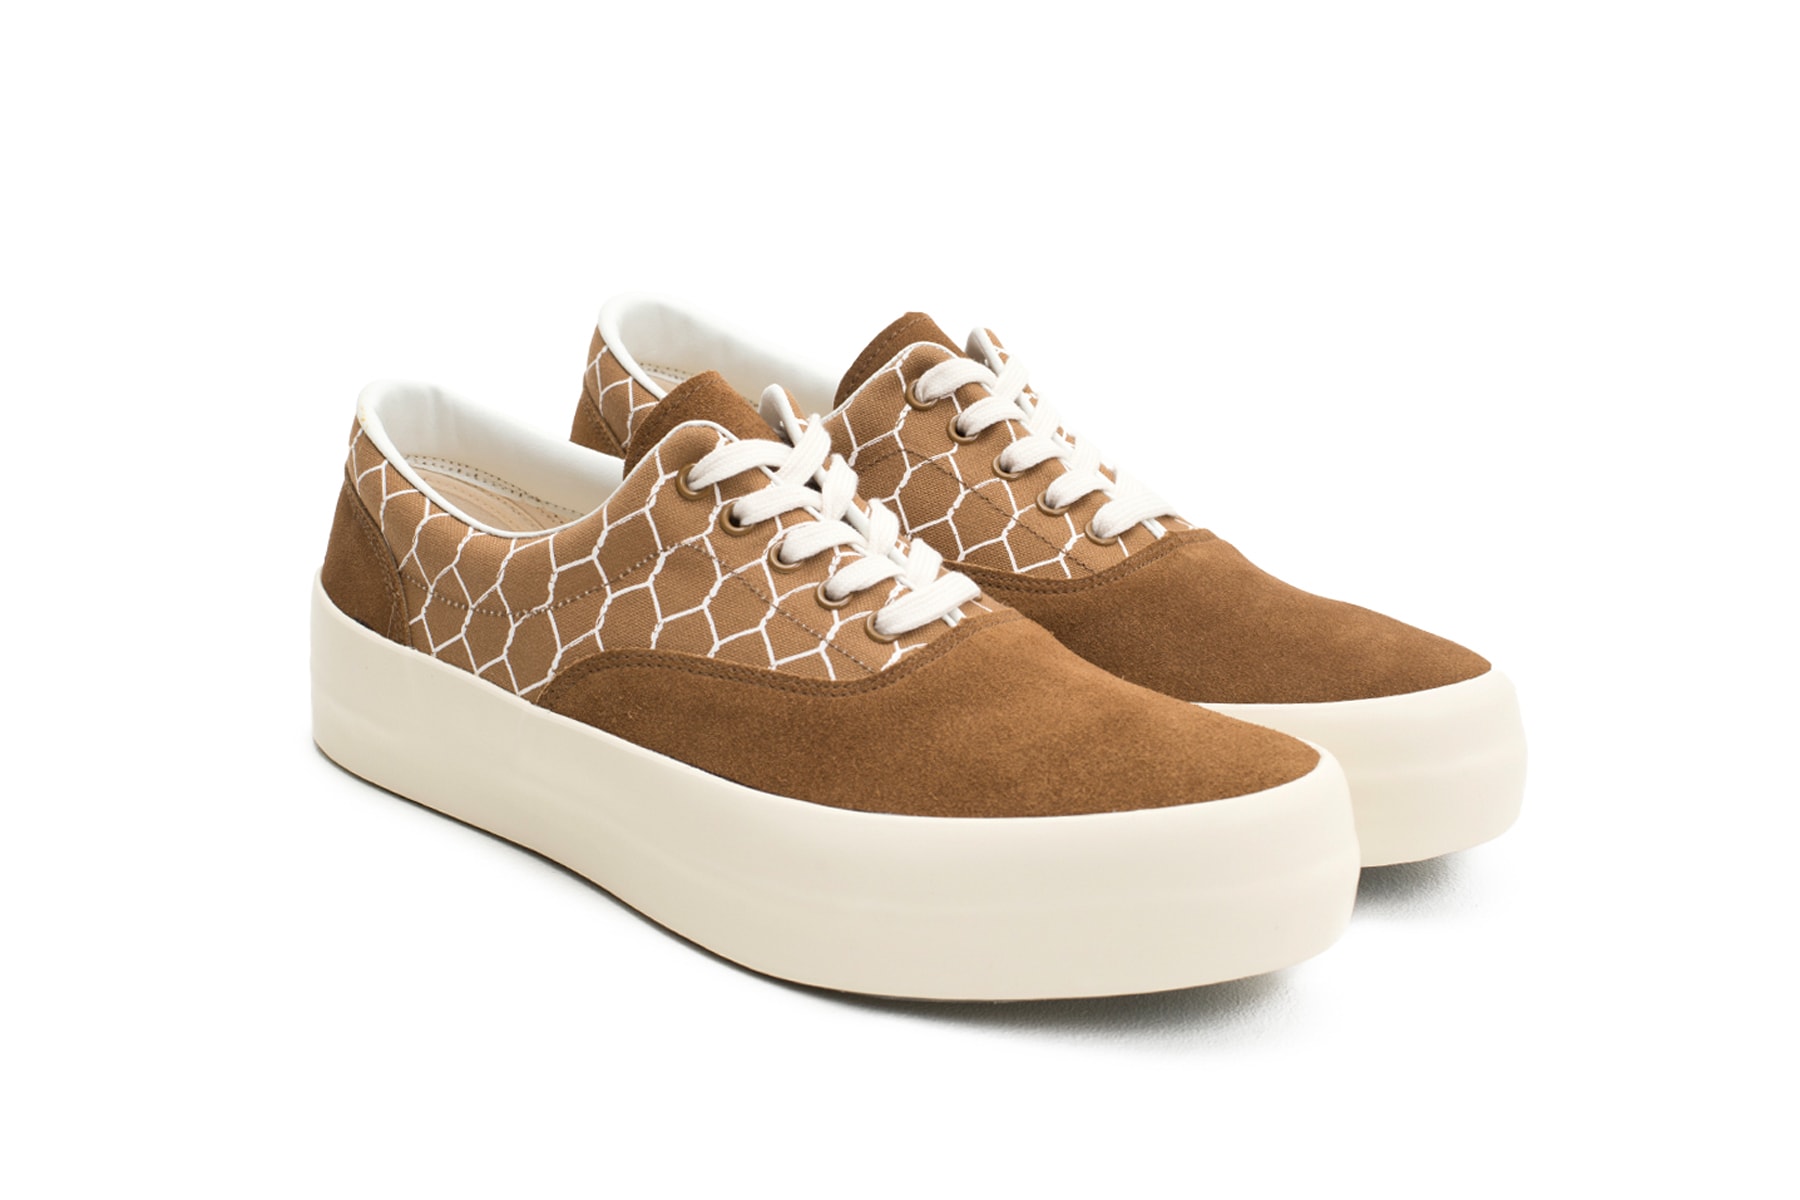 UNDERCOVER Wire Fence Print Tennis Shoe Brown